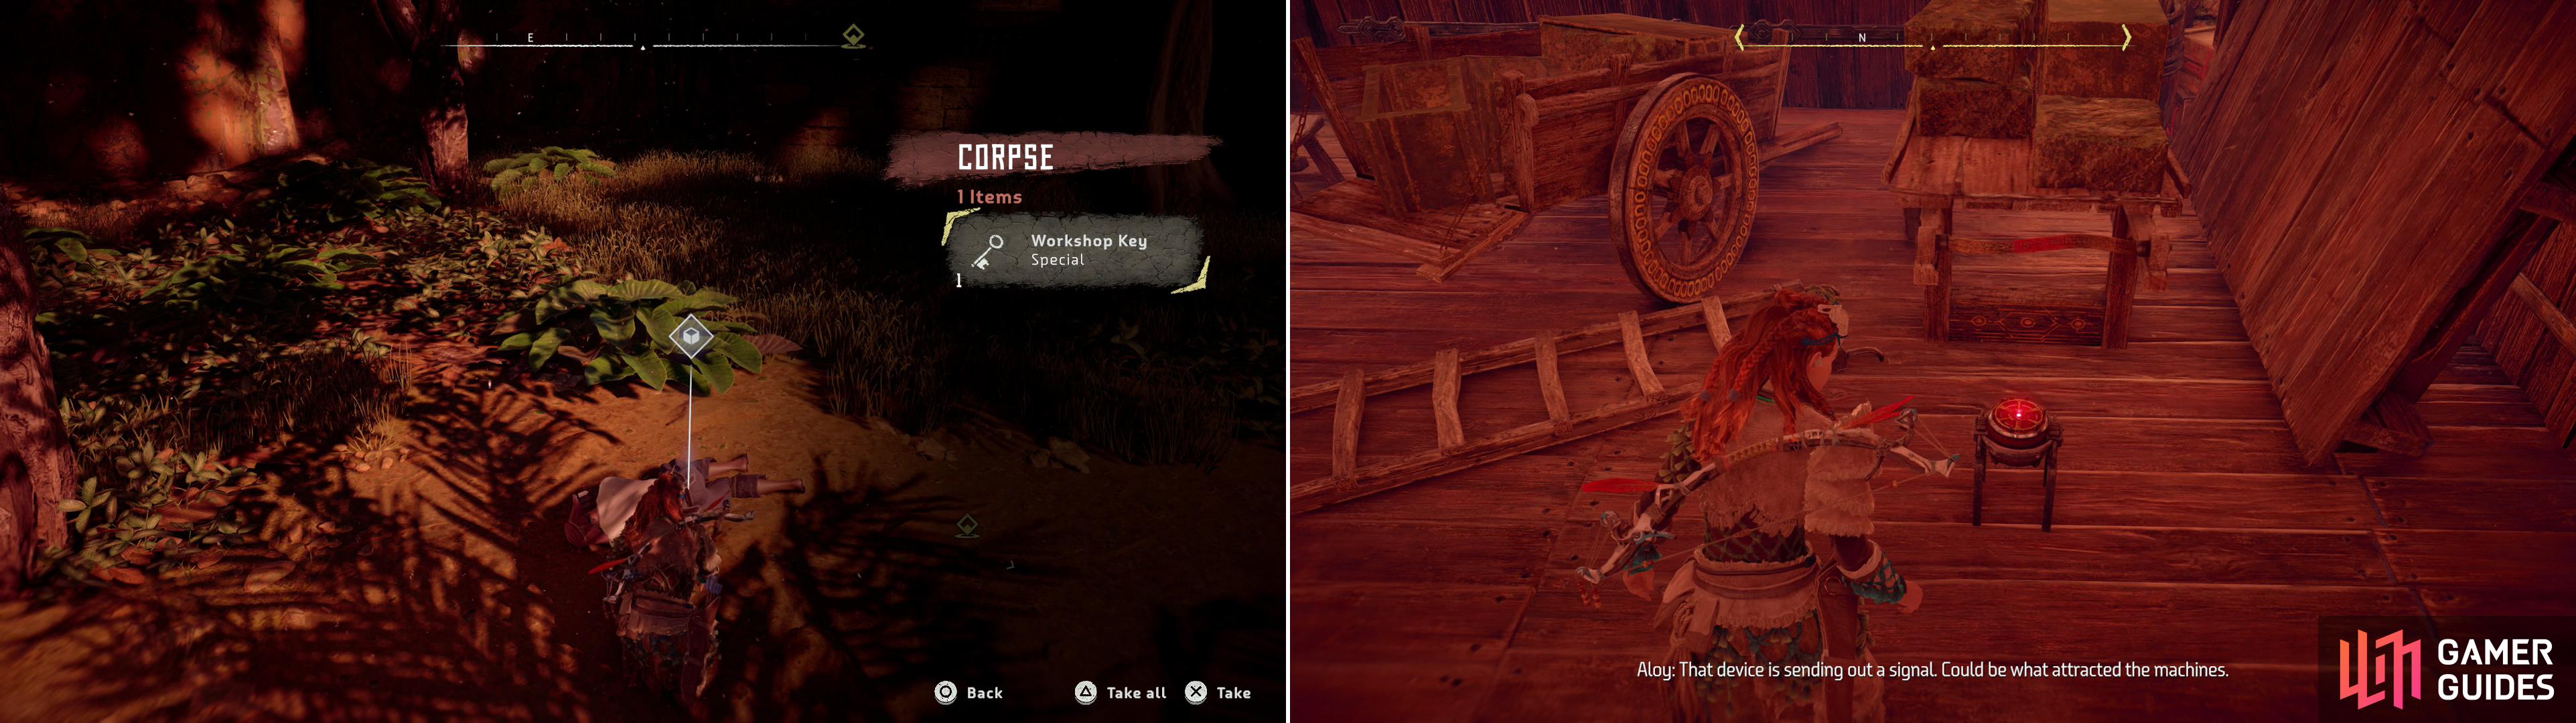 Search a body to find the Workshop Key (left) then investigate the Workshop to find the catalyst for the machine attack (right).